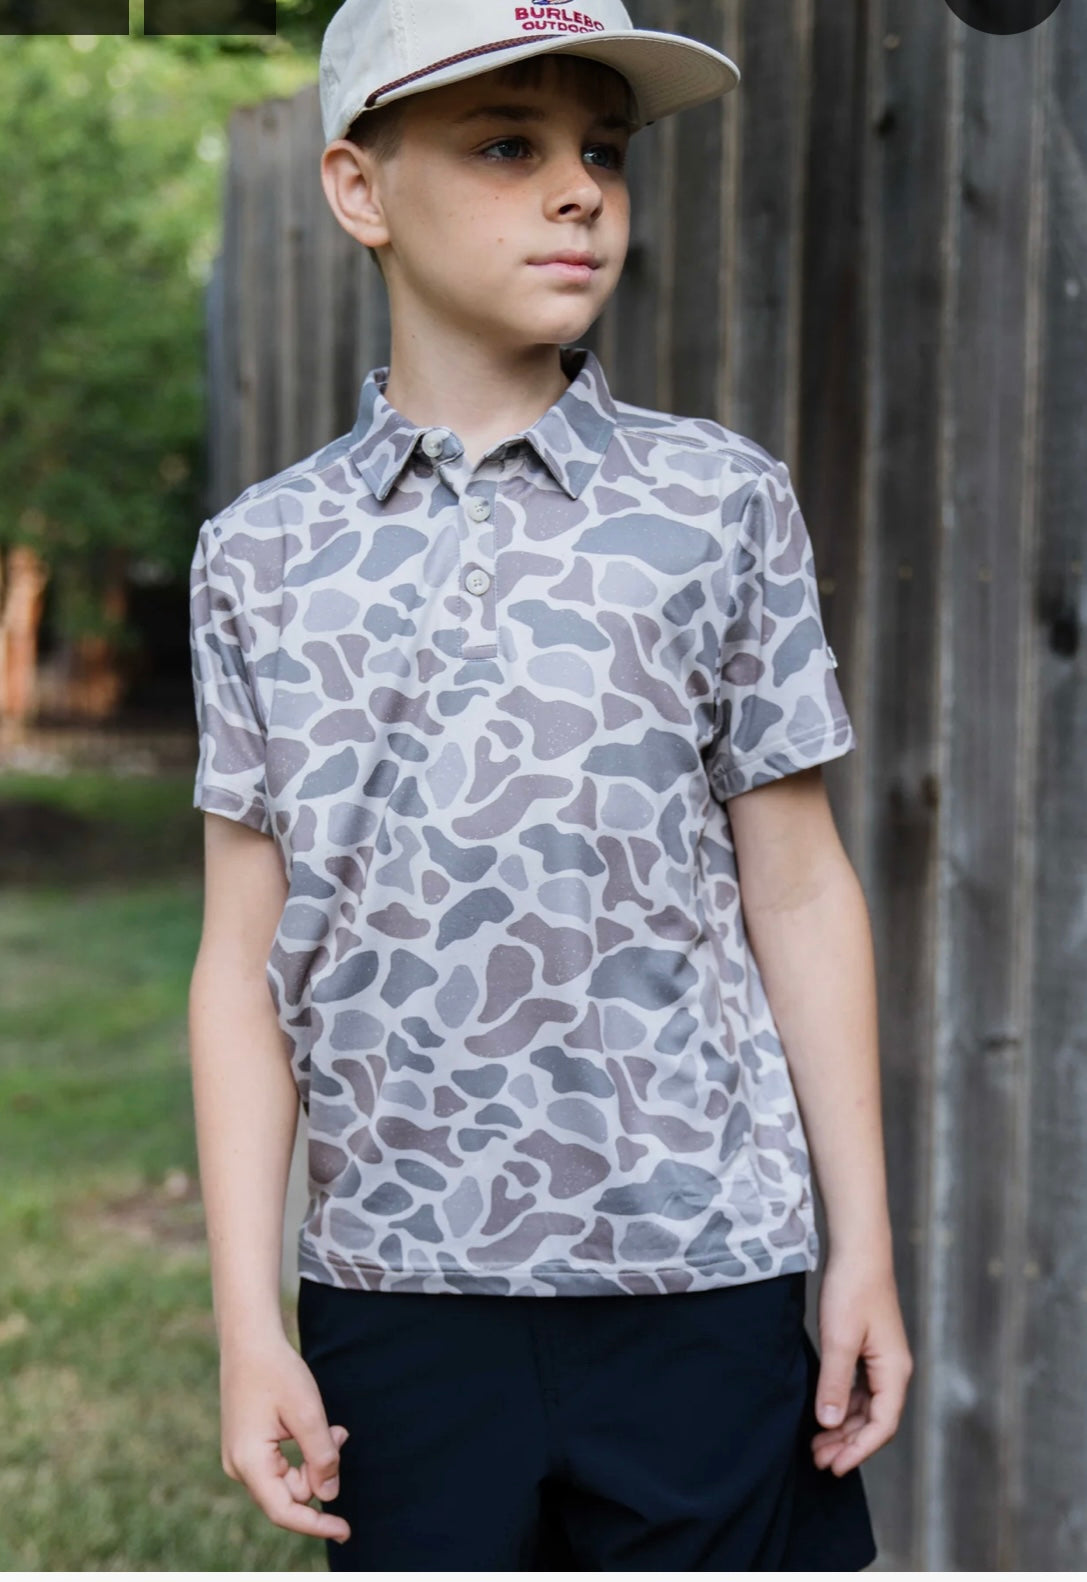 Youth polo in a classic deer camo print